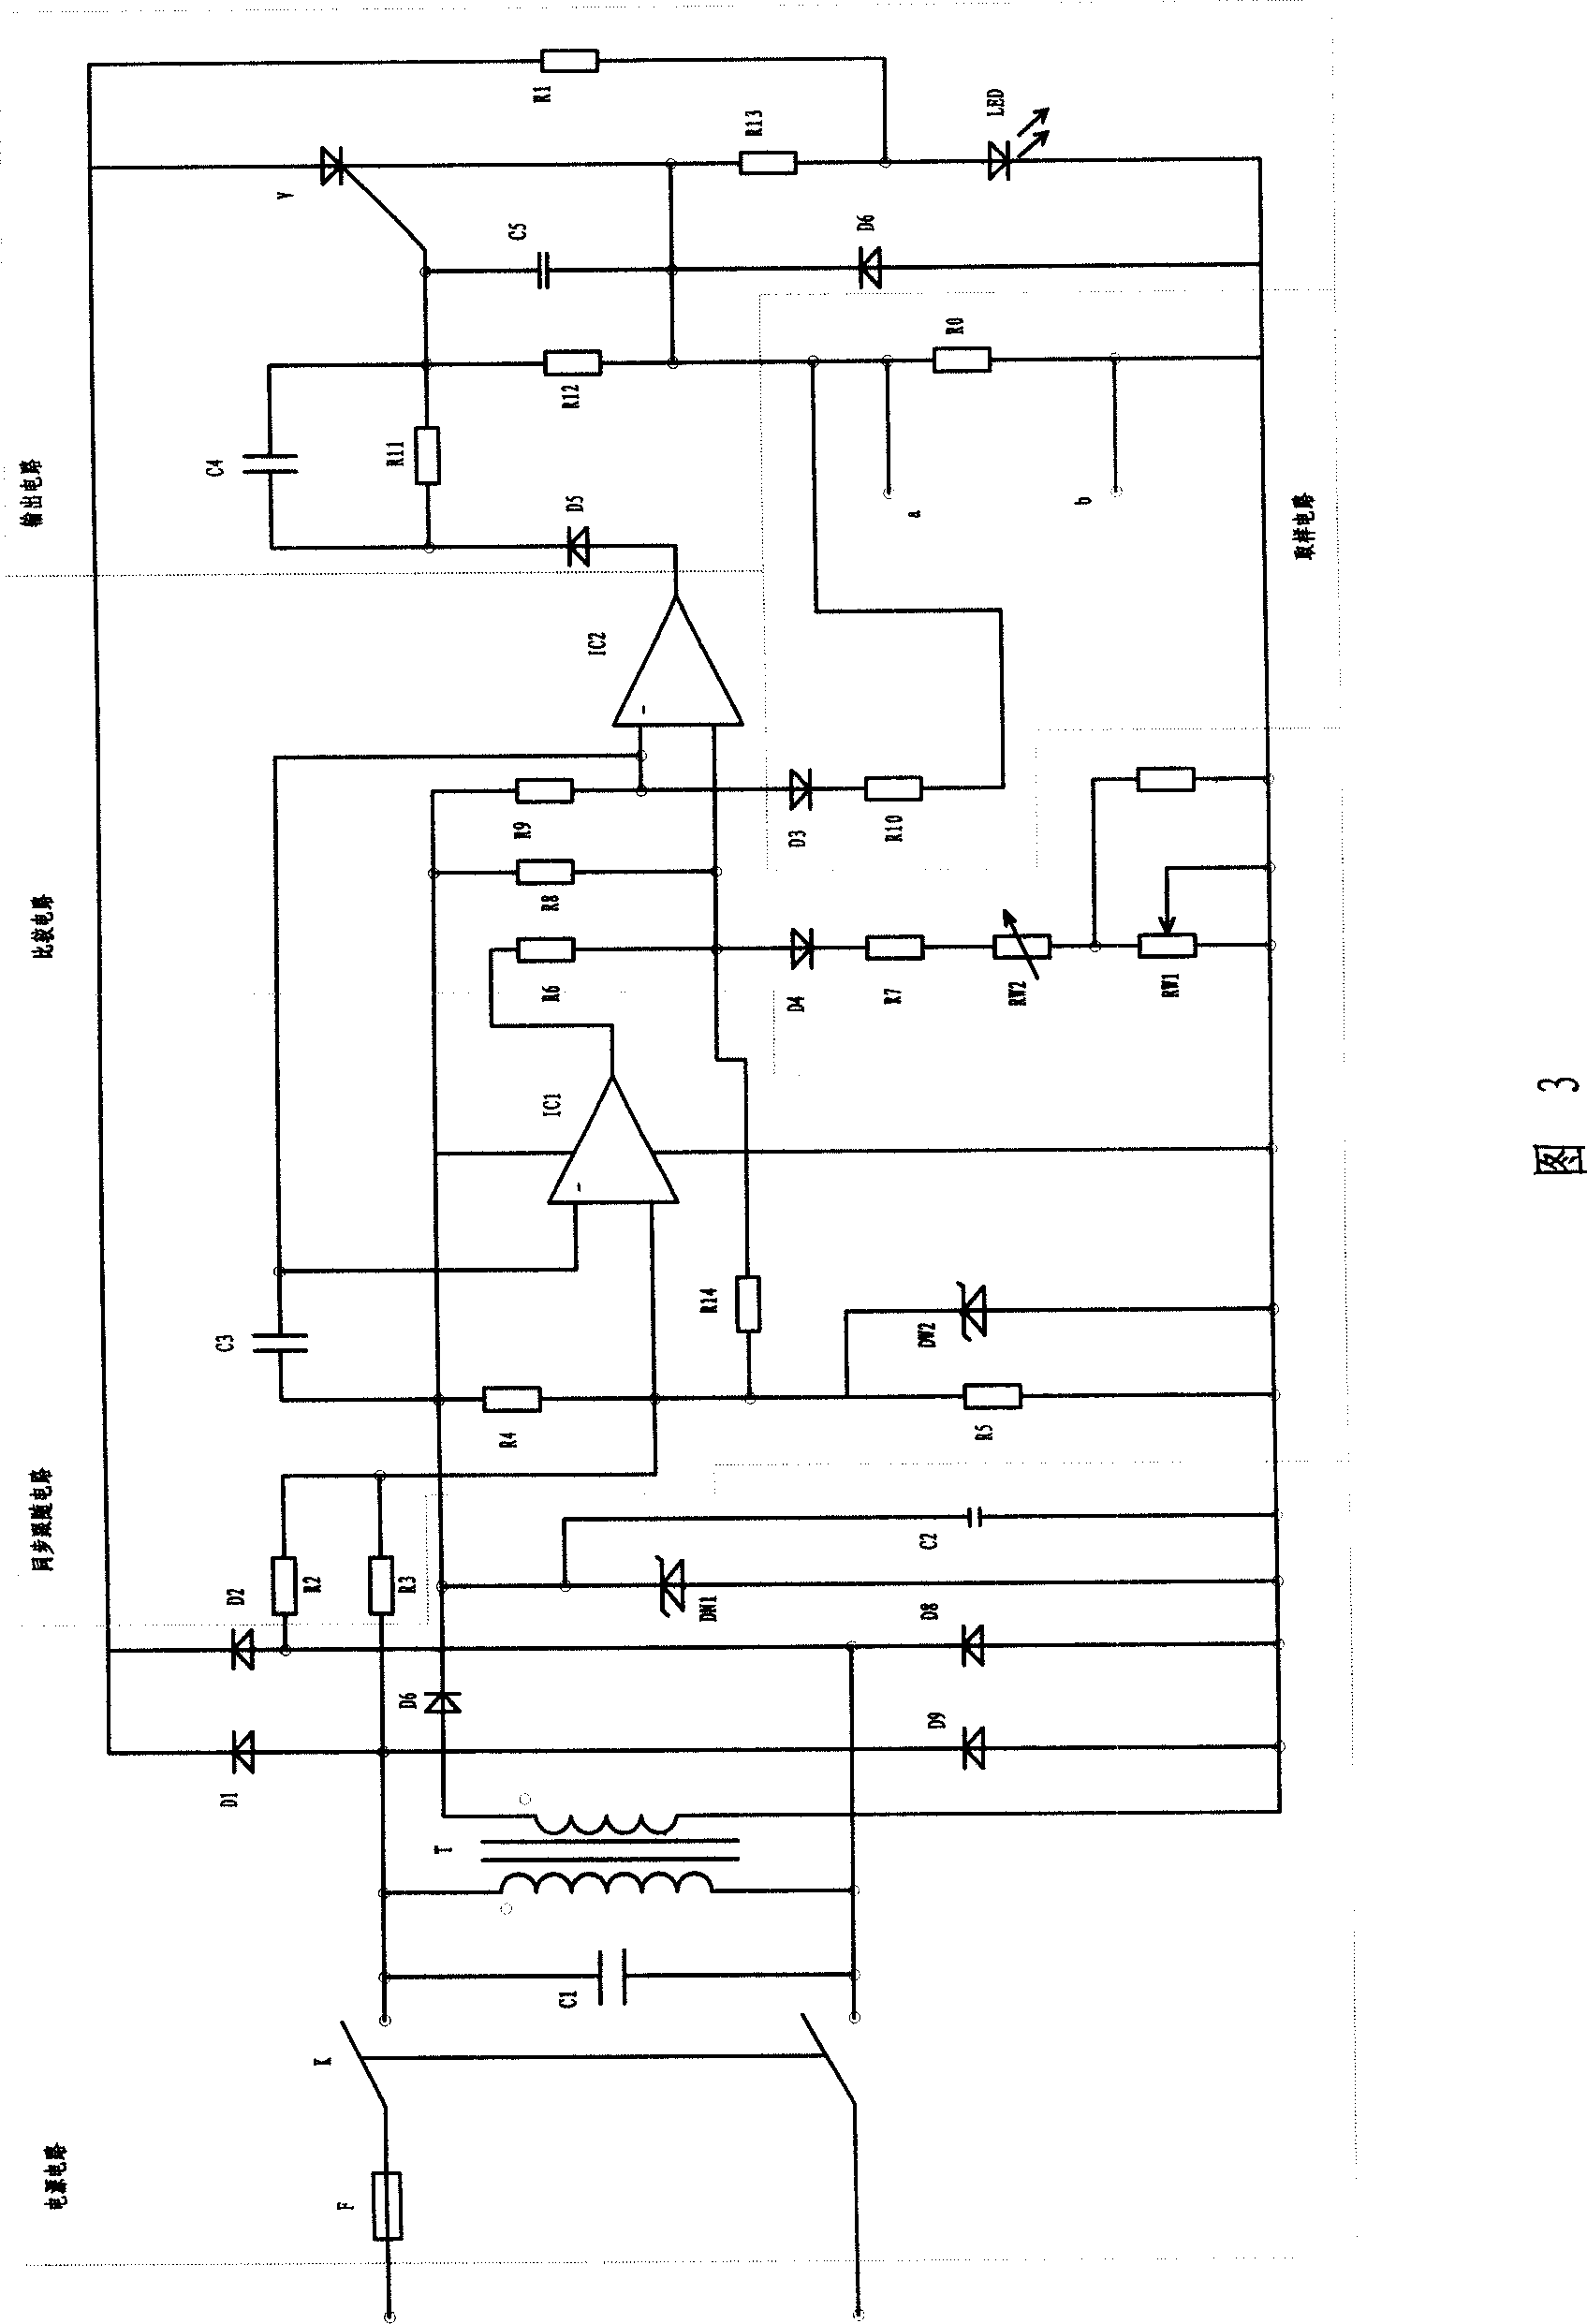 Whole circuit temperature-controlling electric heating device